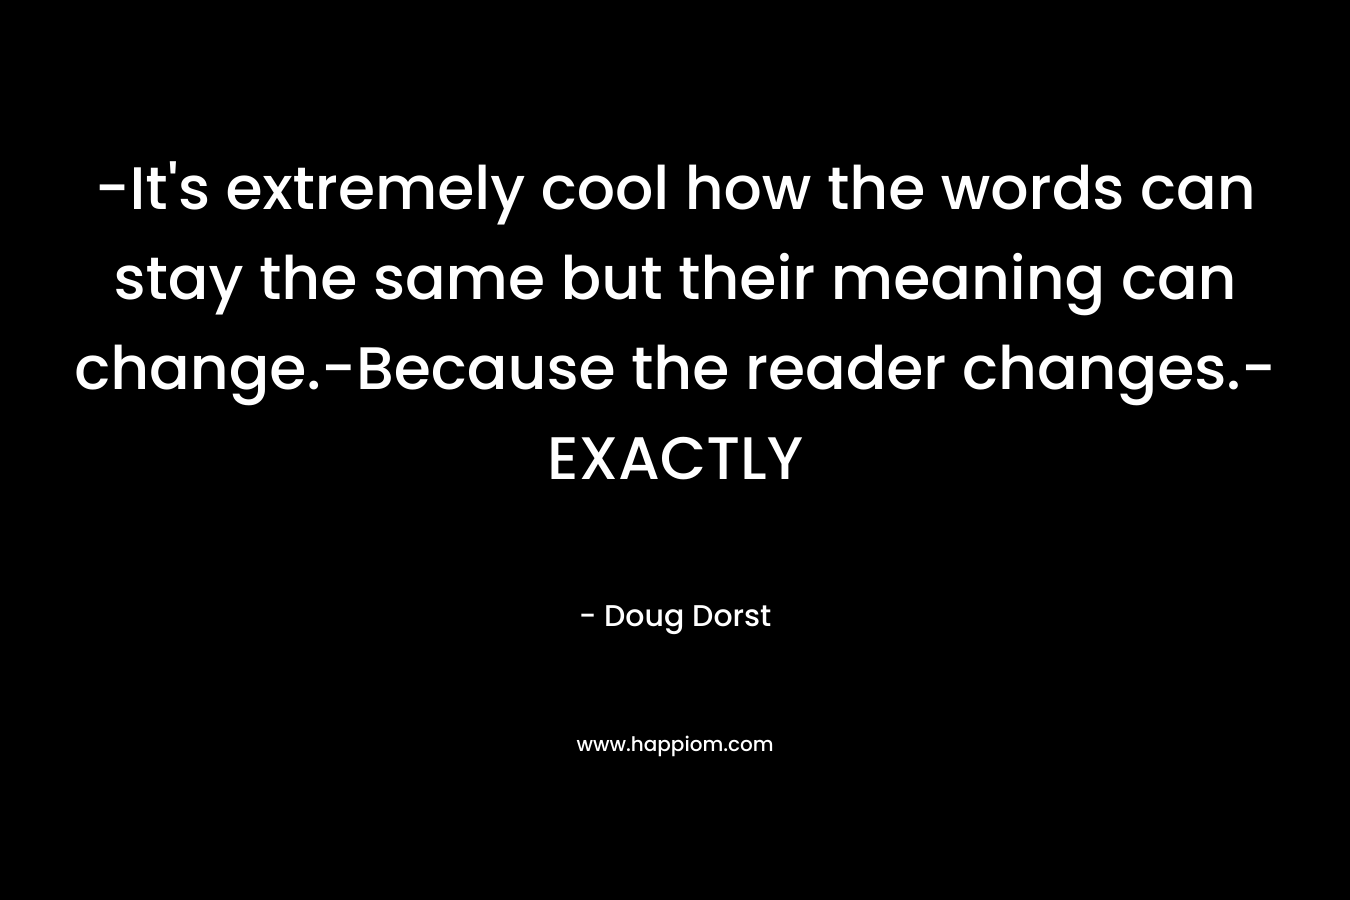 -It’s extremely cool how the words can stay the same but their meaning can change.-Because the reader changes.-EXACTLY – Doug Dorst